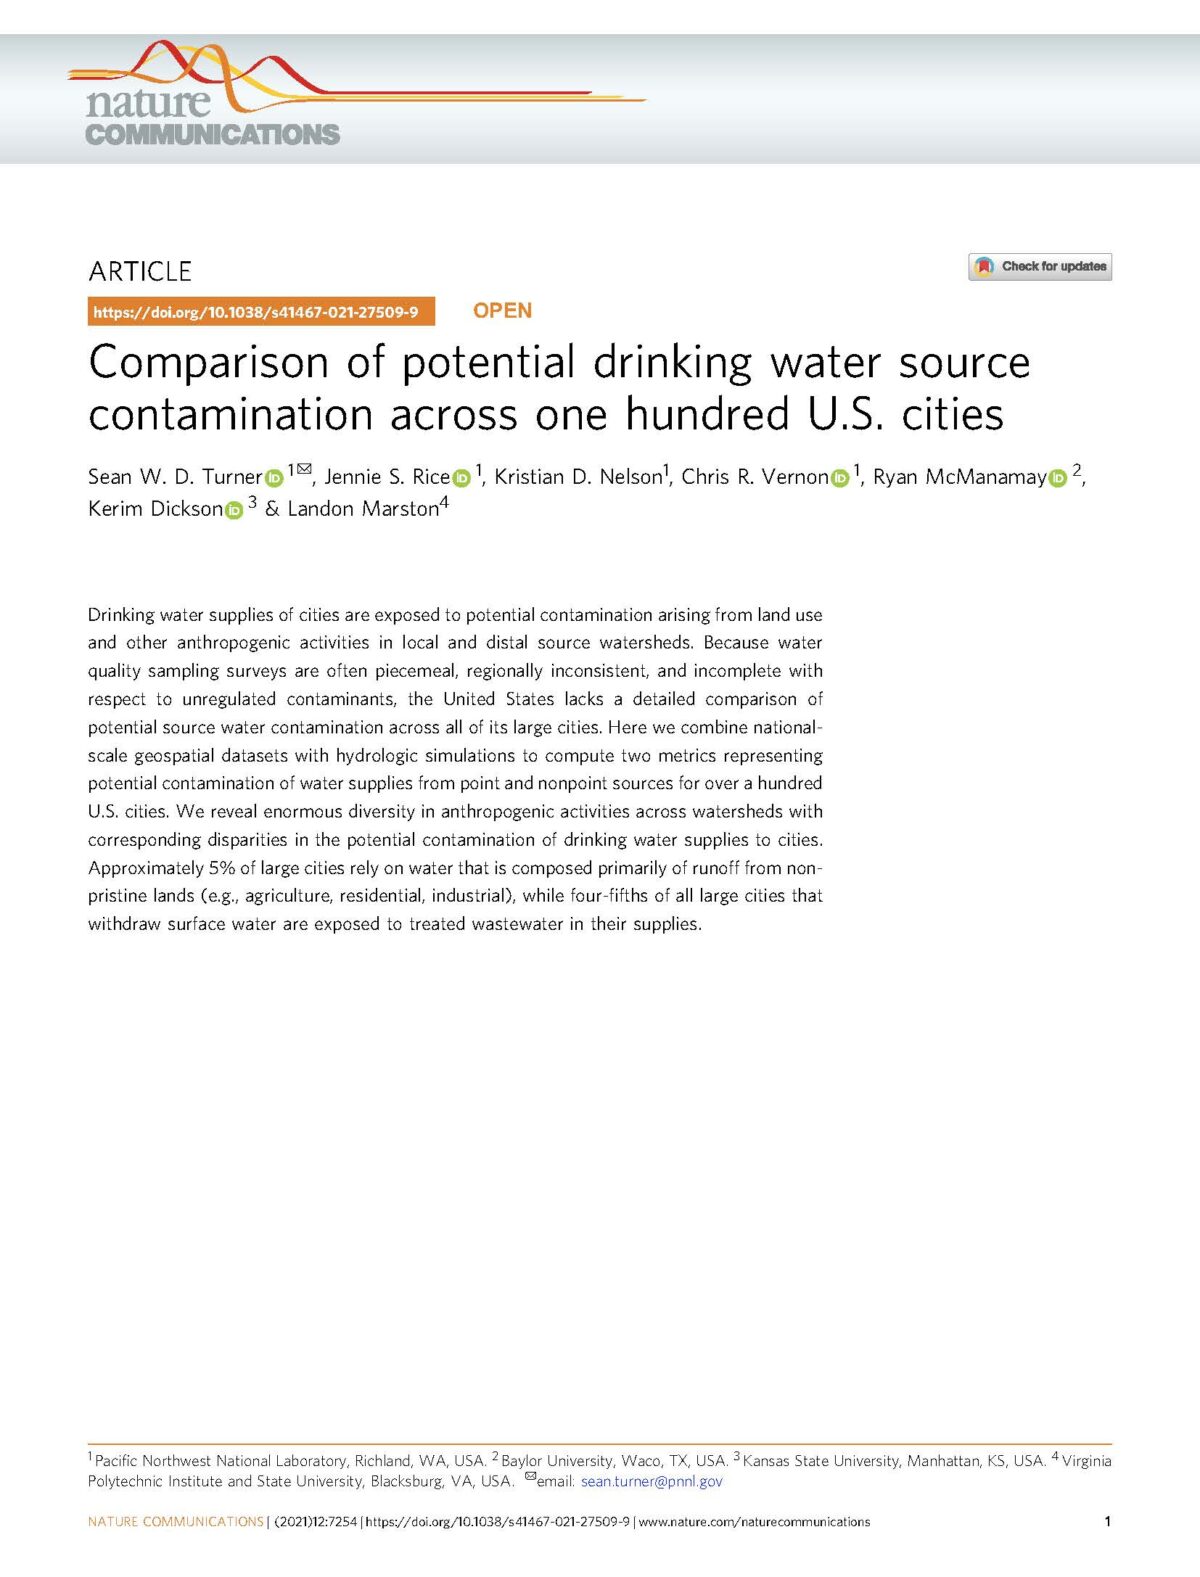 Comparison of potential drinking water source contamination across one hundred U.S. cities